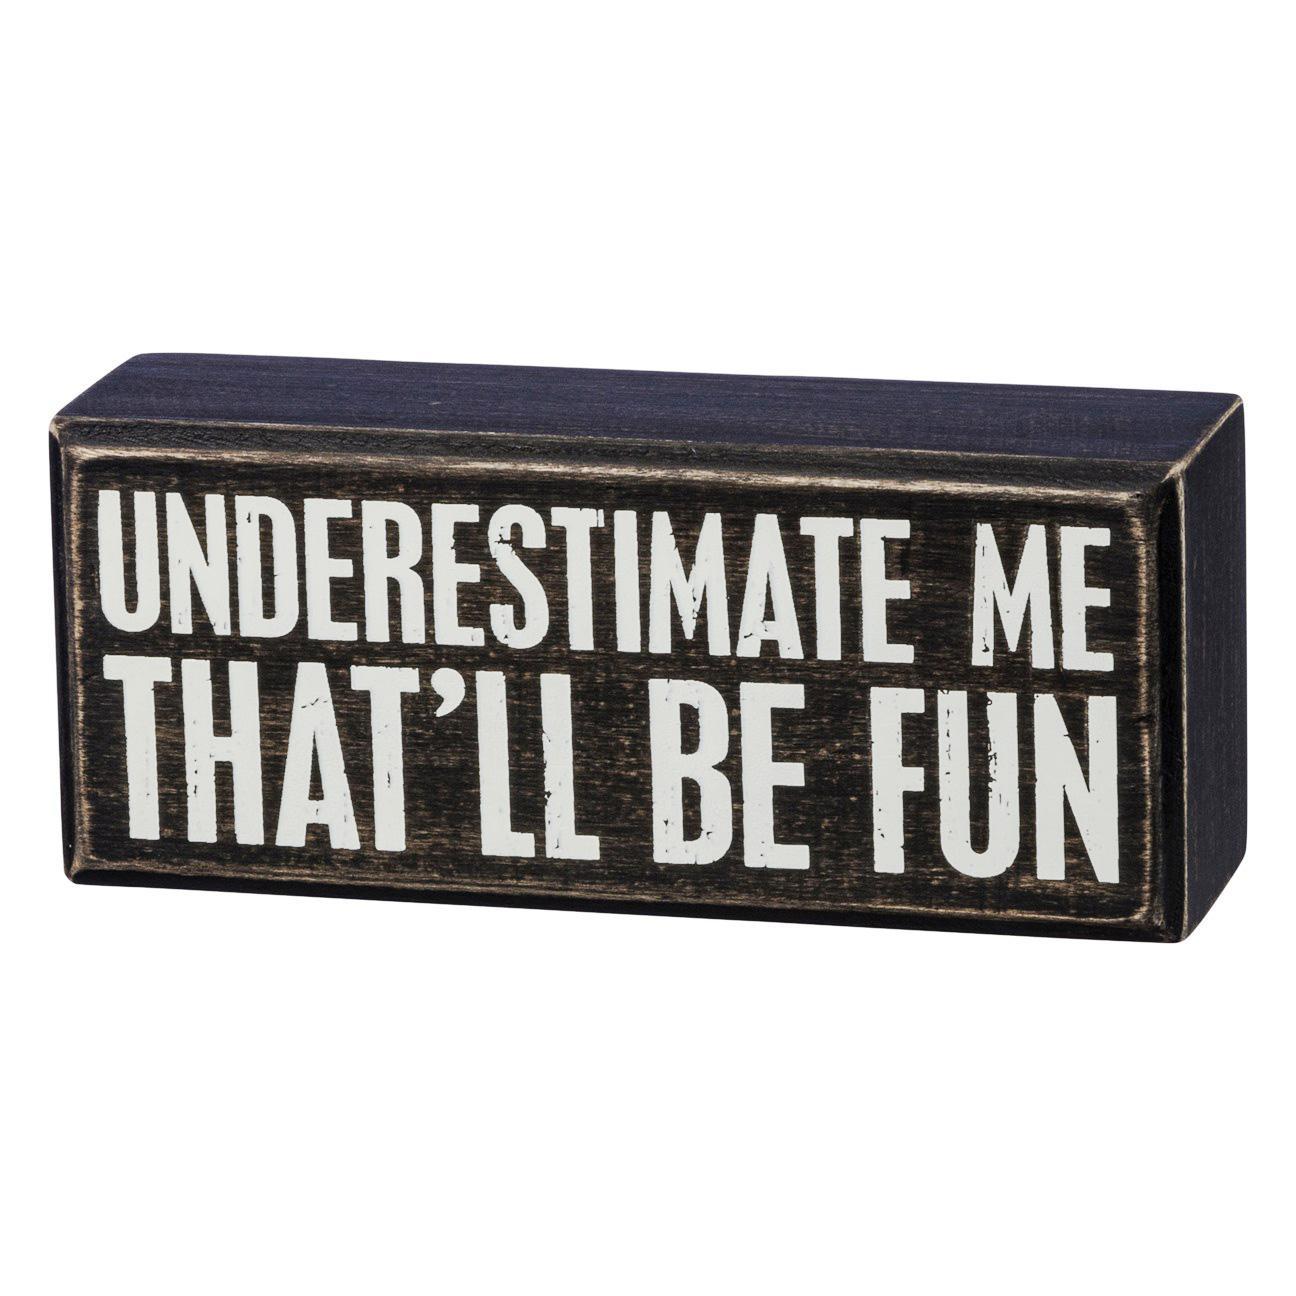 Underestimate Me? That'll Be Fun! Quirky Box Sign for a Dash of Humor